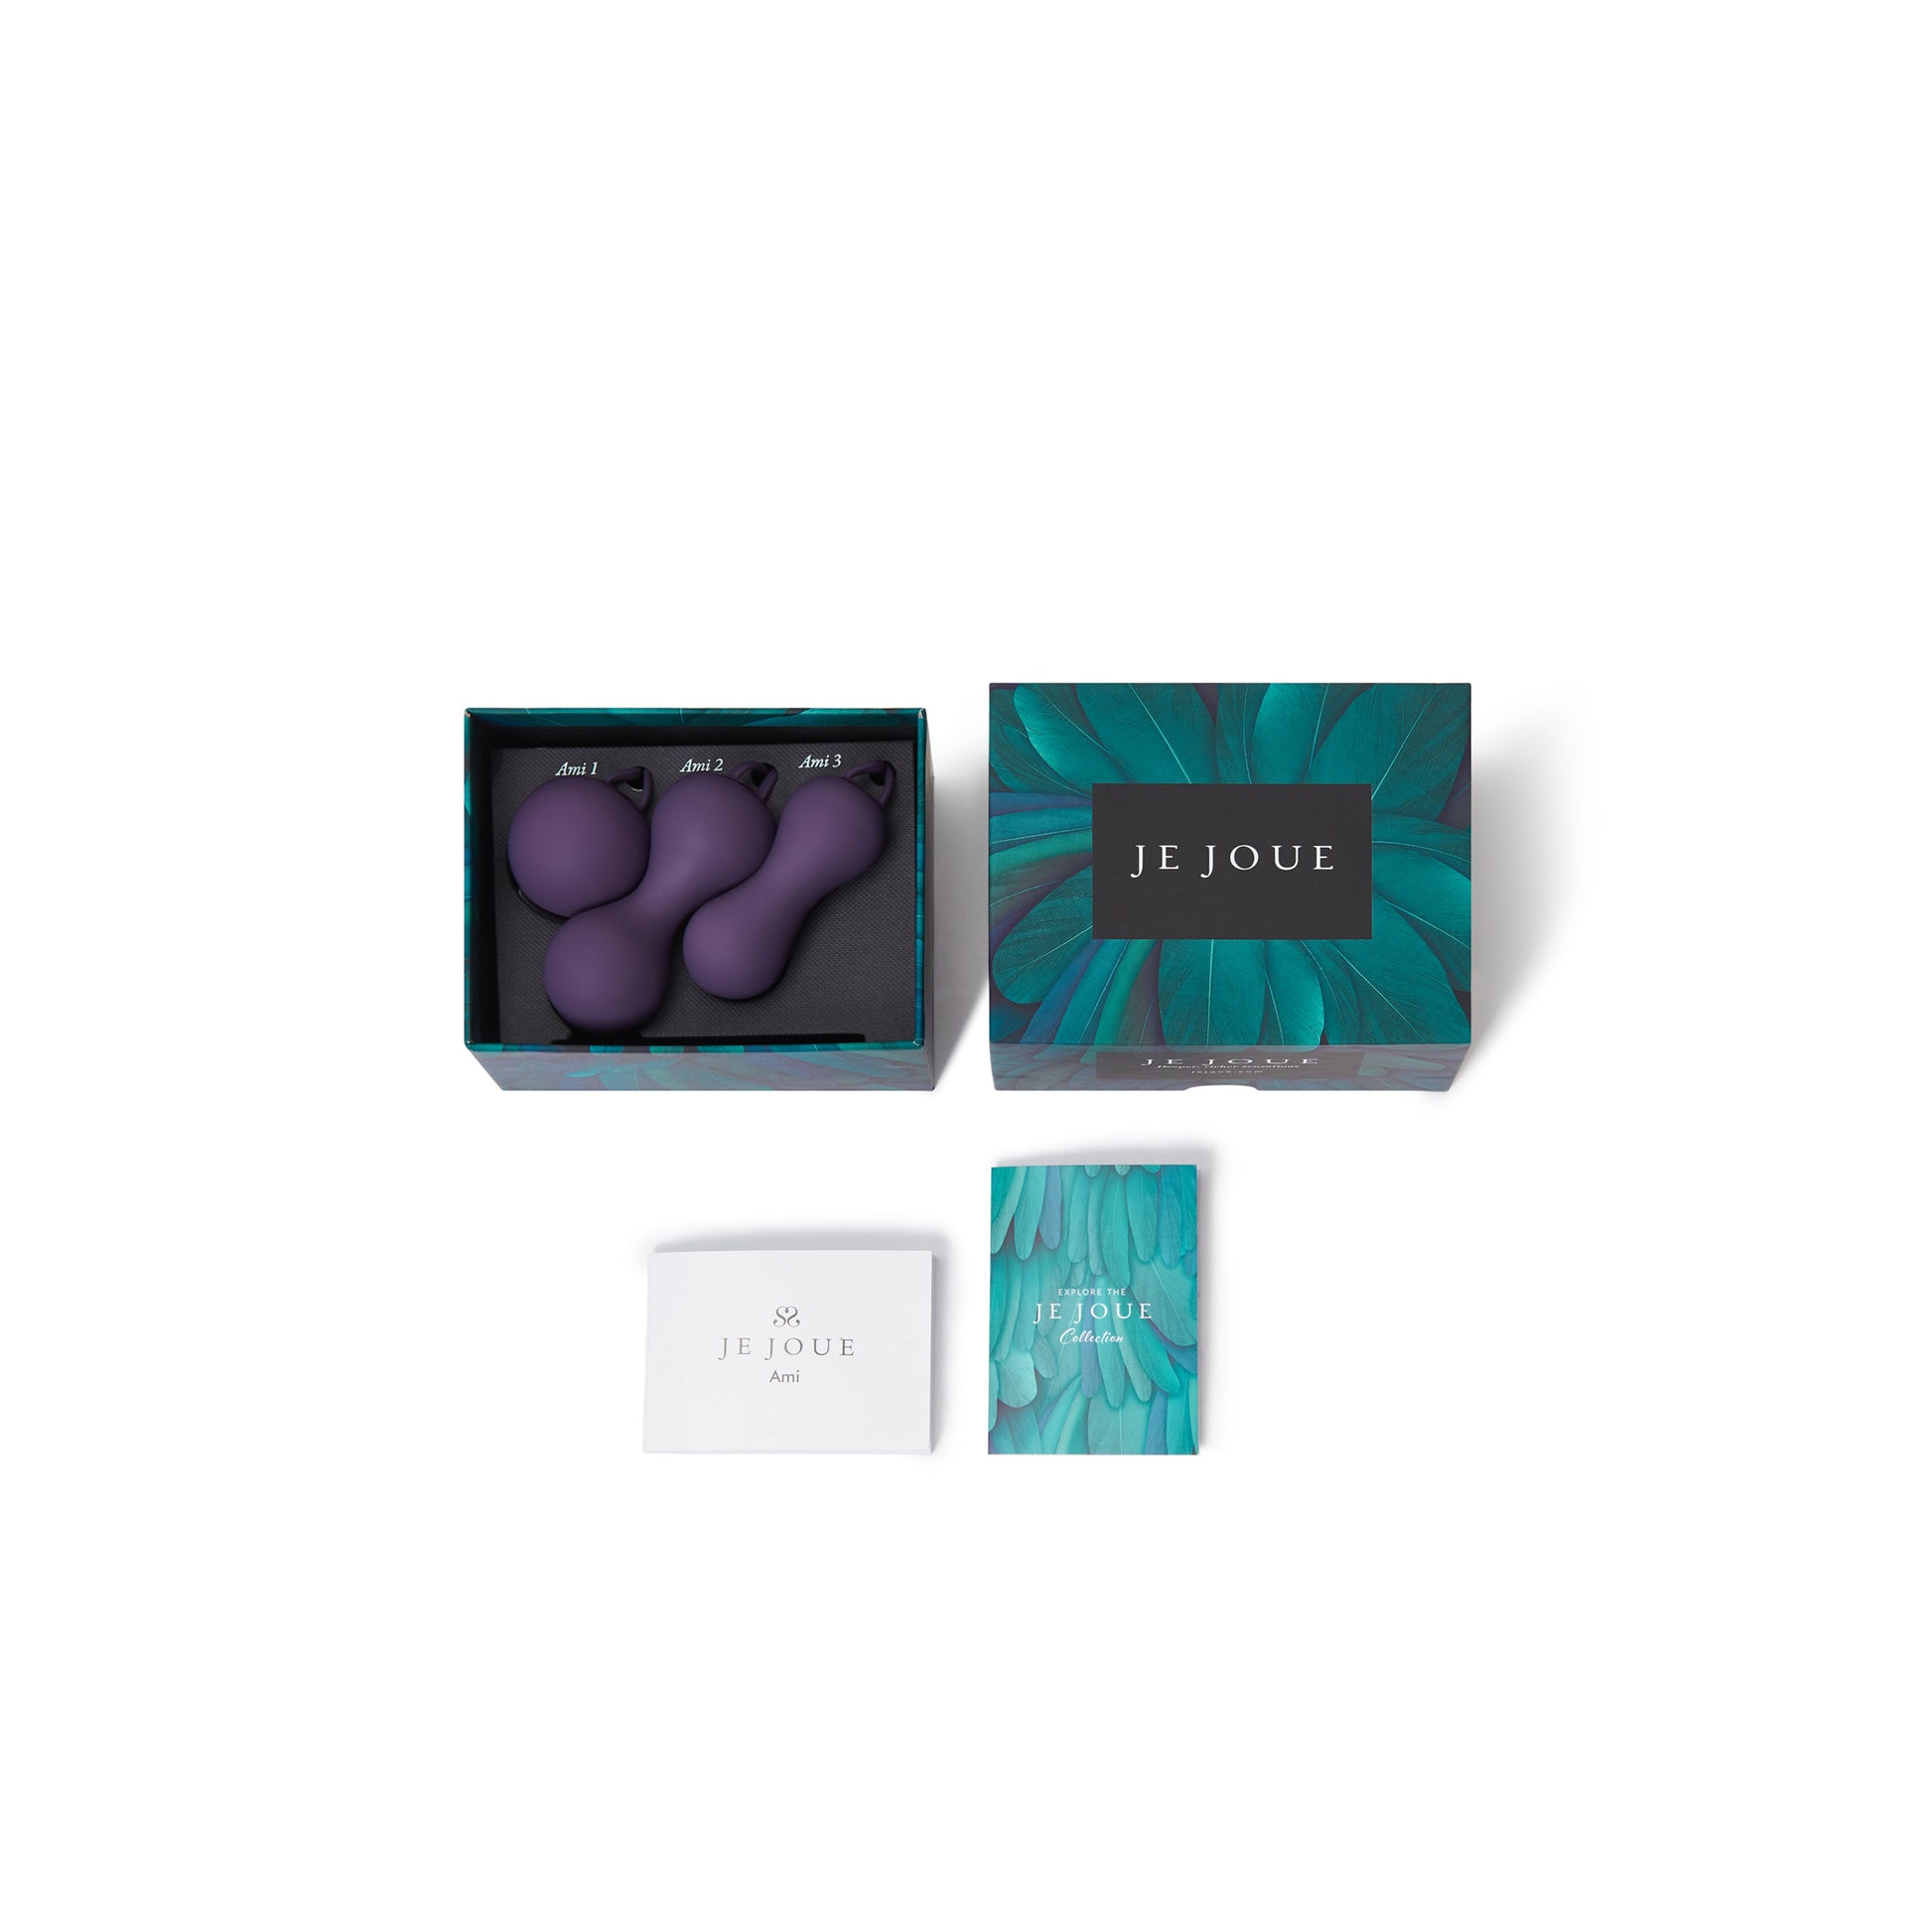 Ami Kegel Set in box with accessories